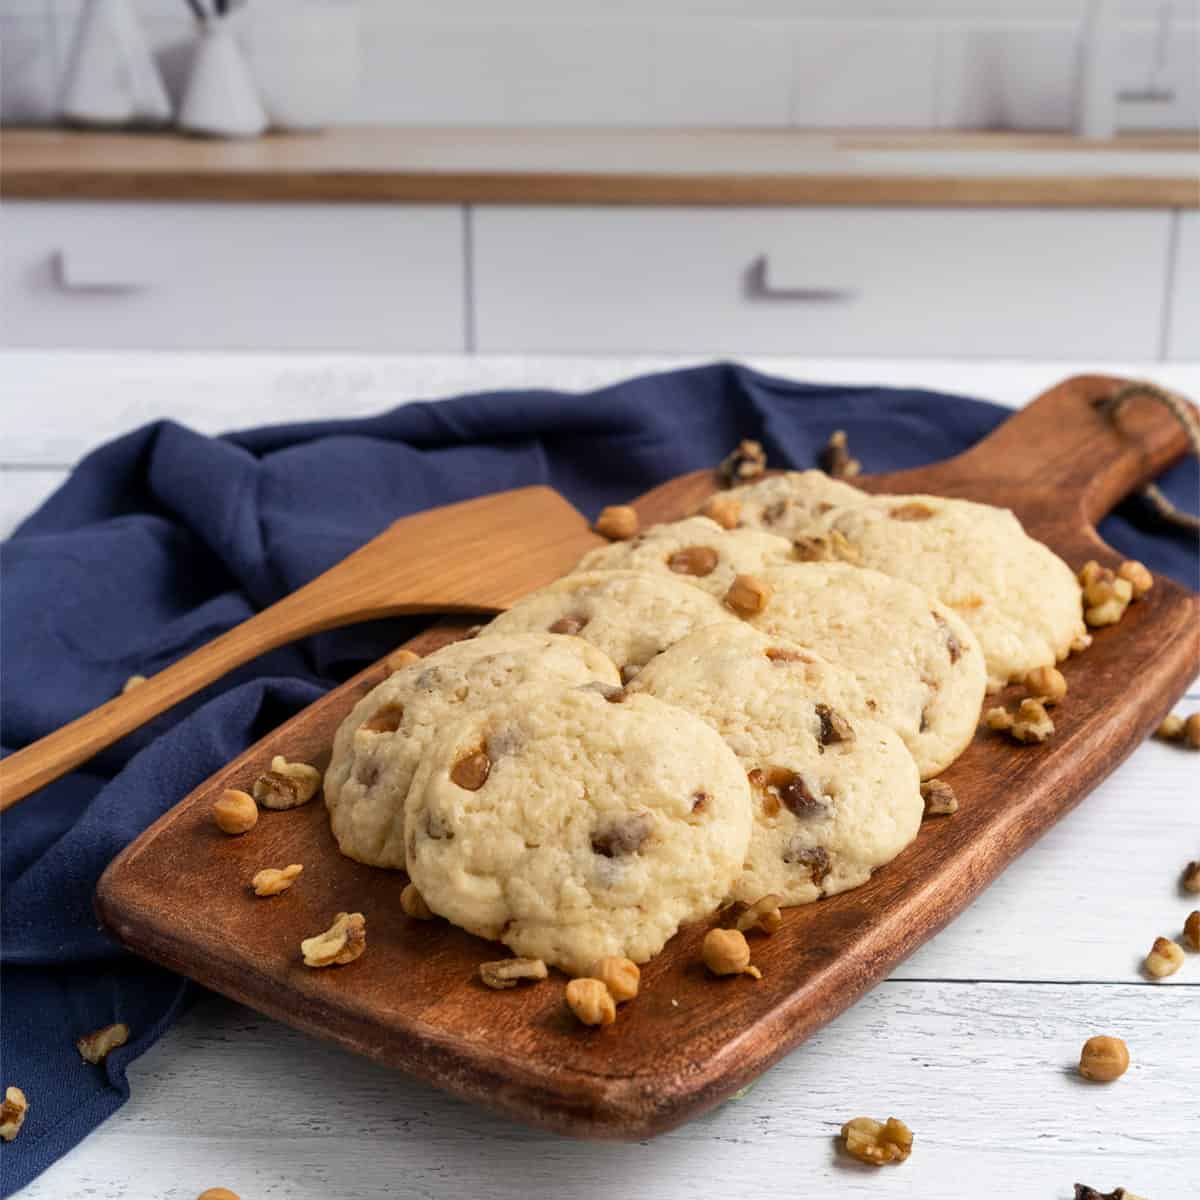 Caramel bits with dates and walnut cookies displayed on a wooden board with a blue towel on the side.